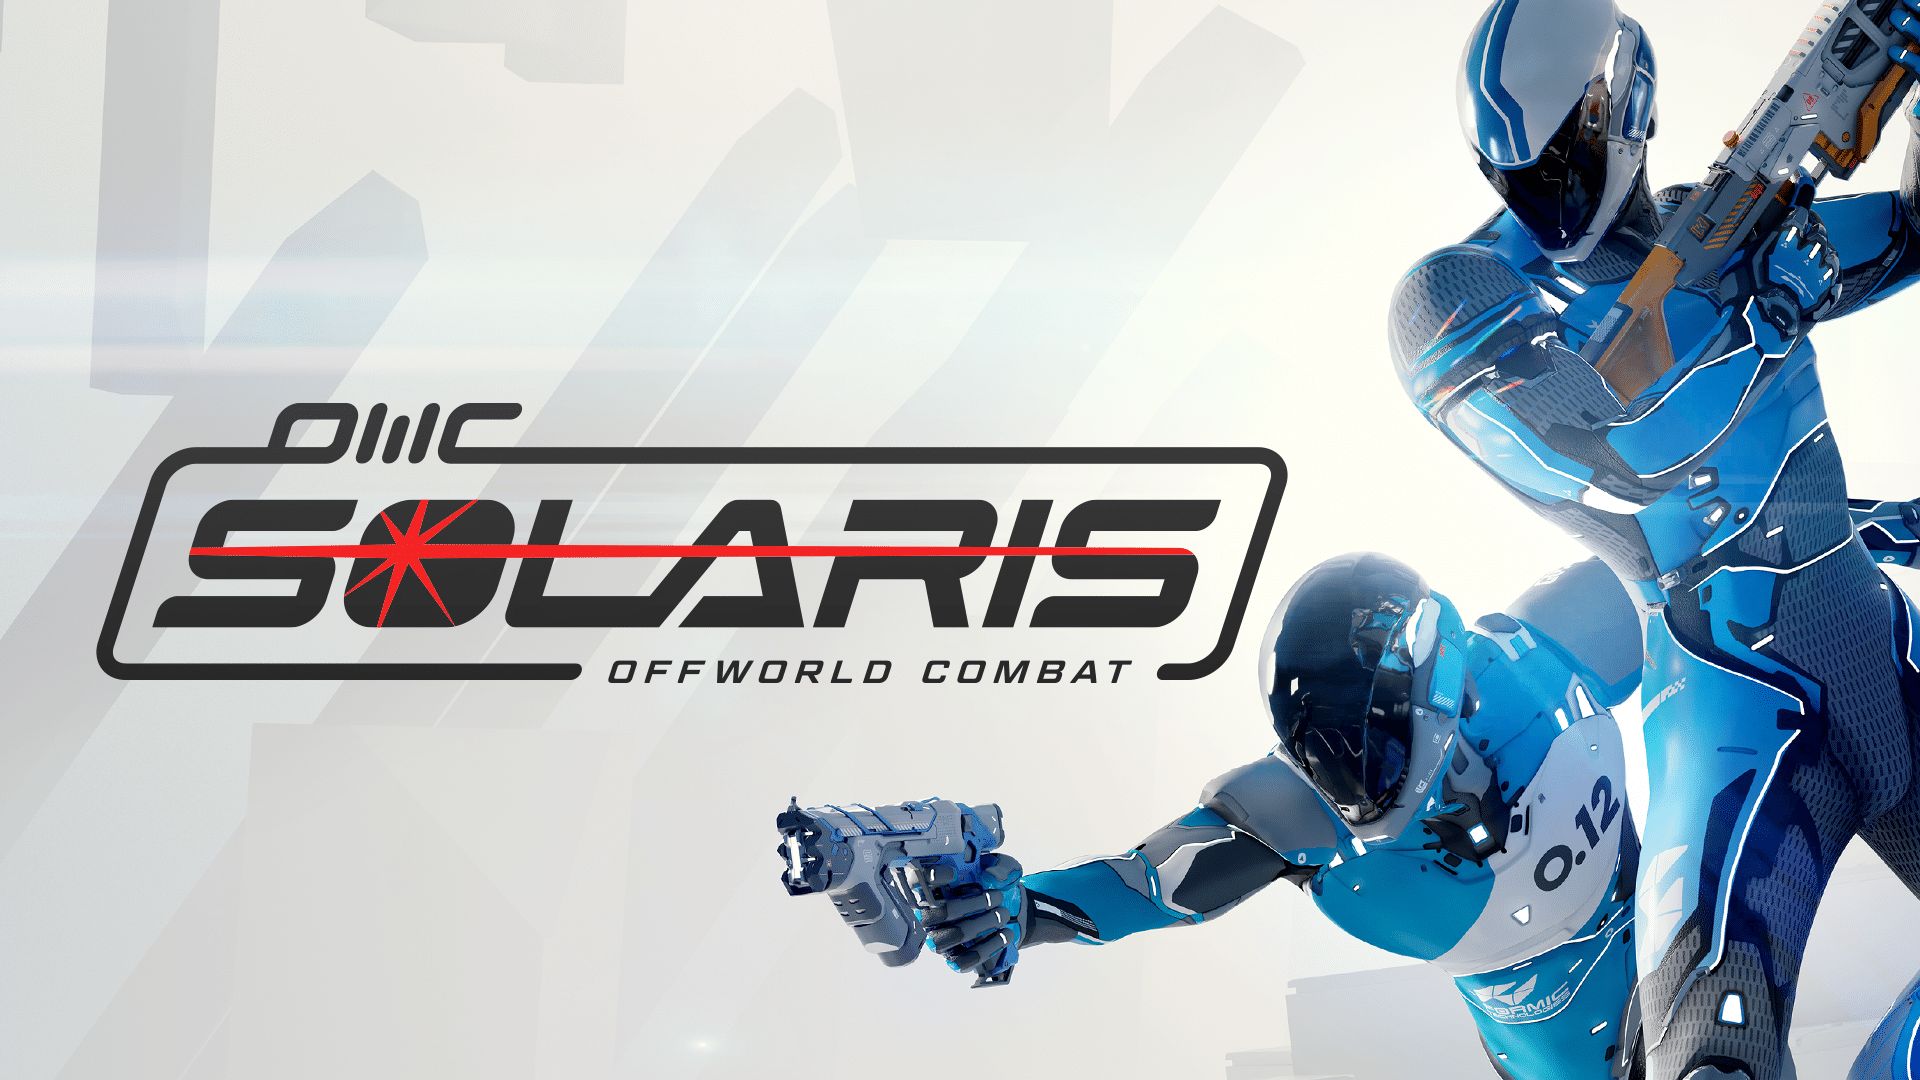 /solaris-offworld-combat-could-be-the-future-of-vr-esports-5r7i3tr5 feature image